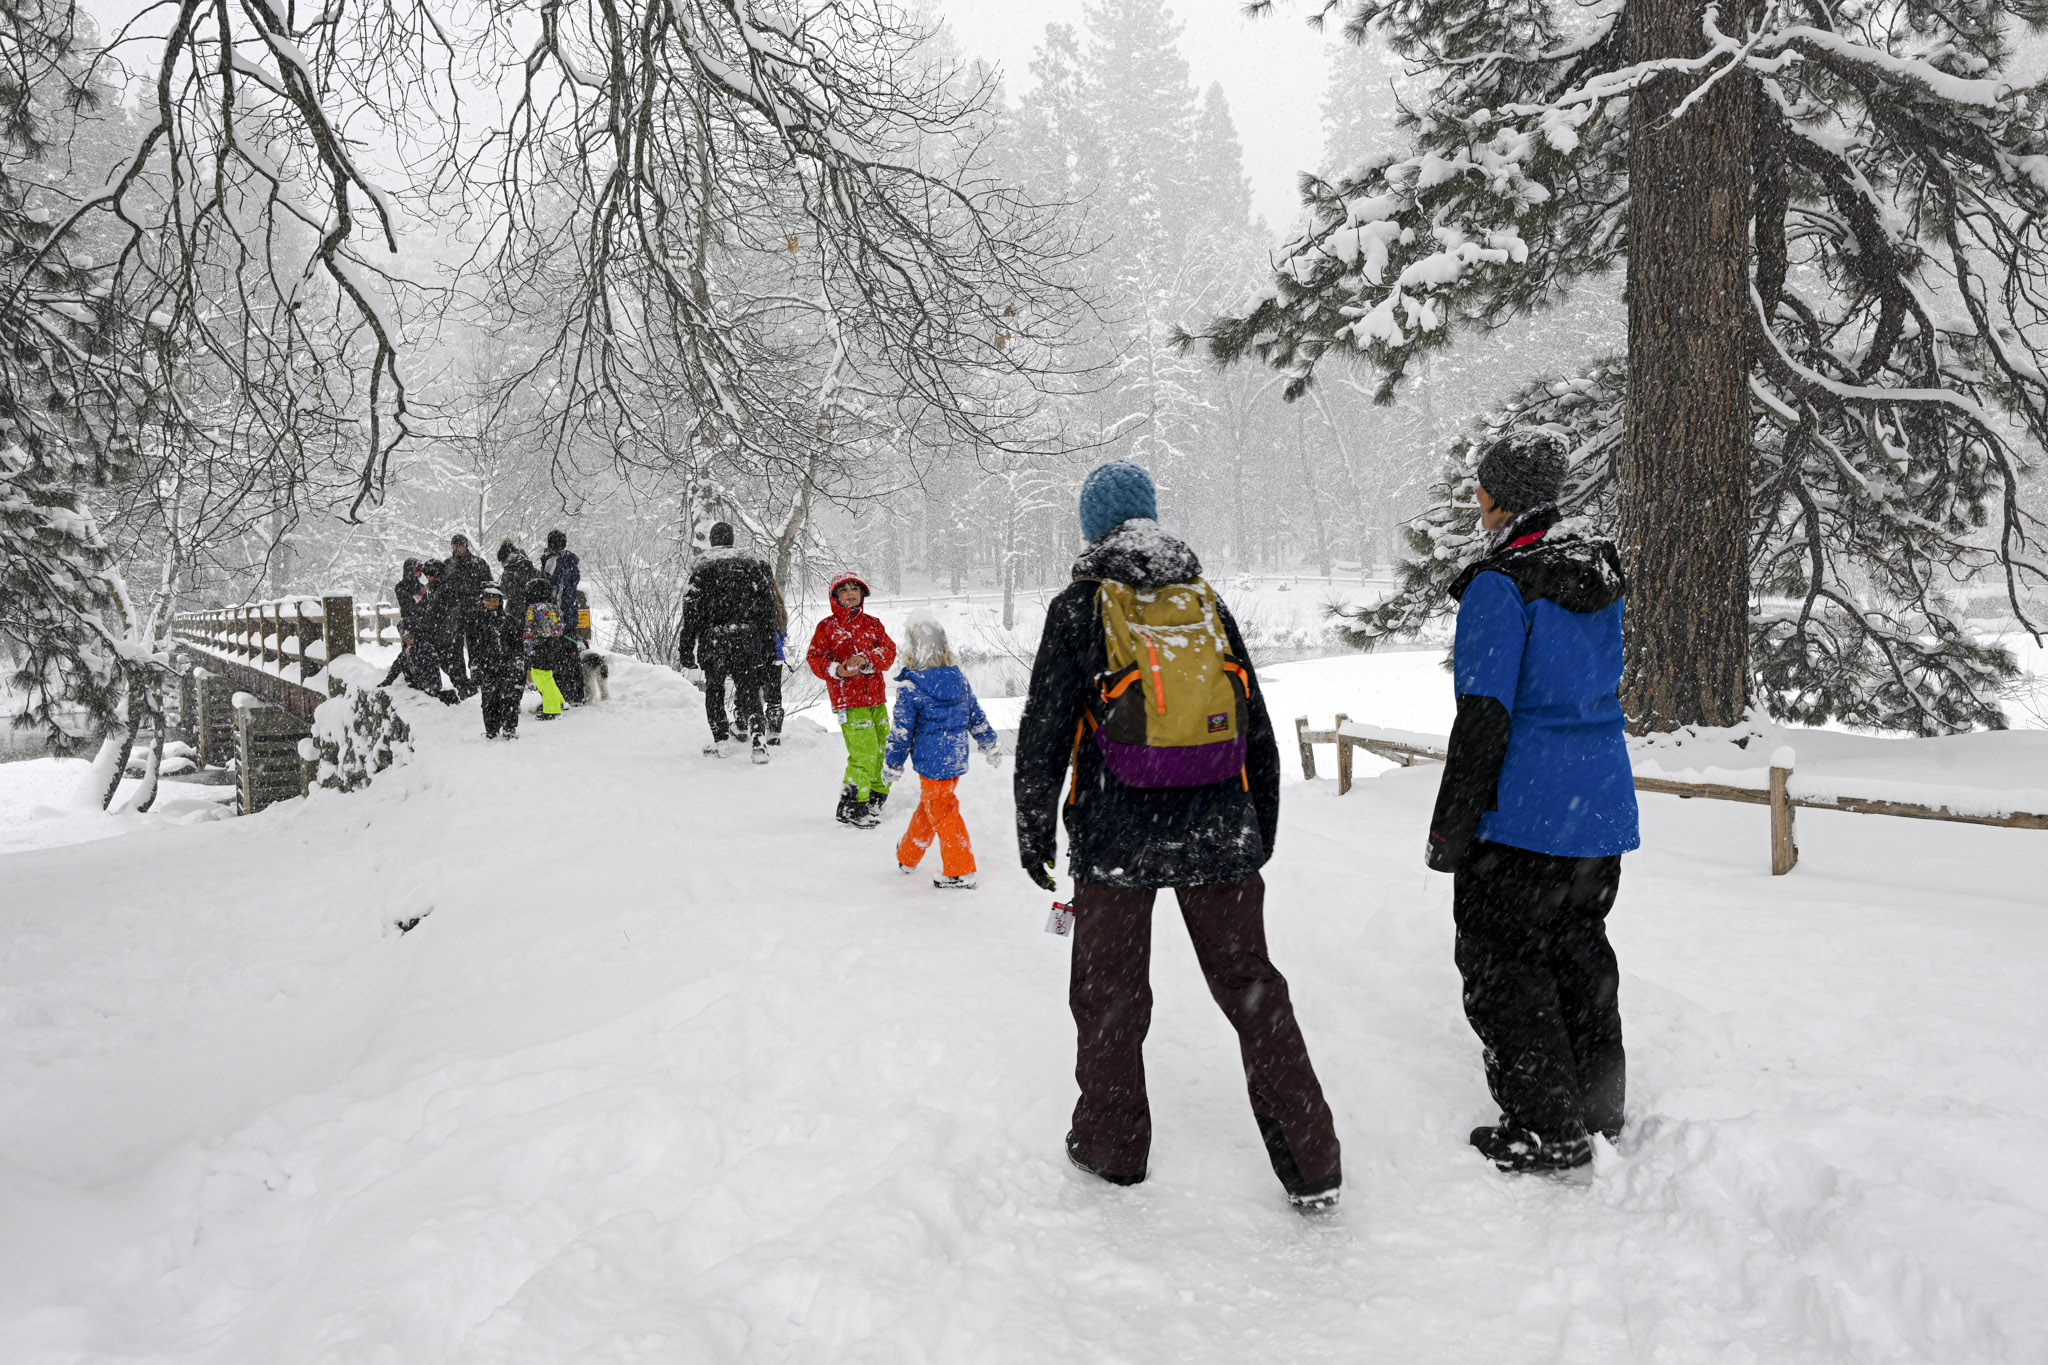 Yosemite will finally reopen after epic storms buried the park in 15 feet of snow